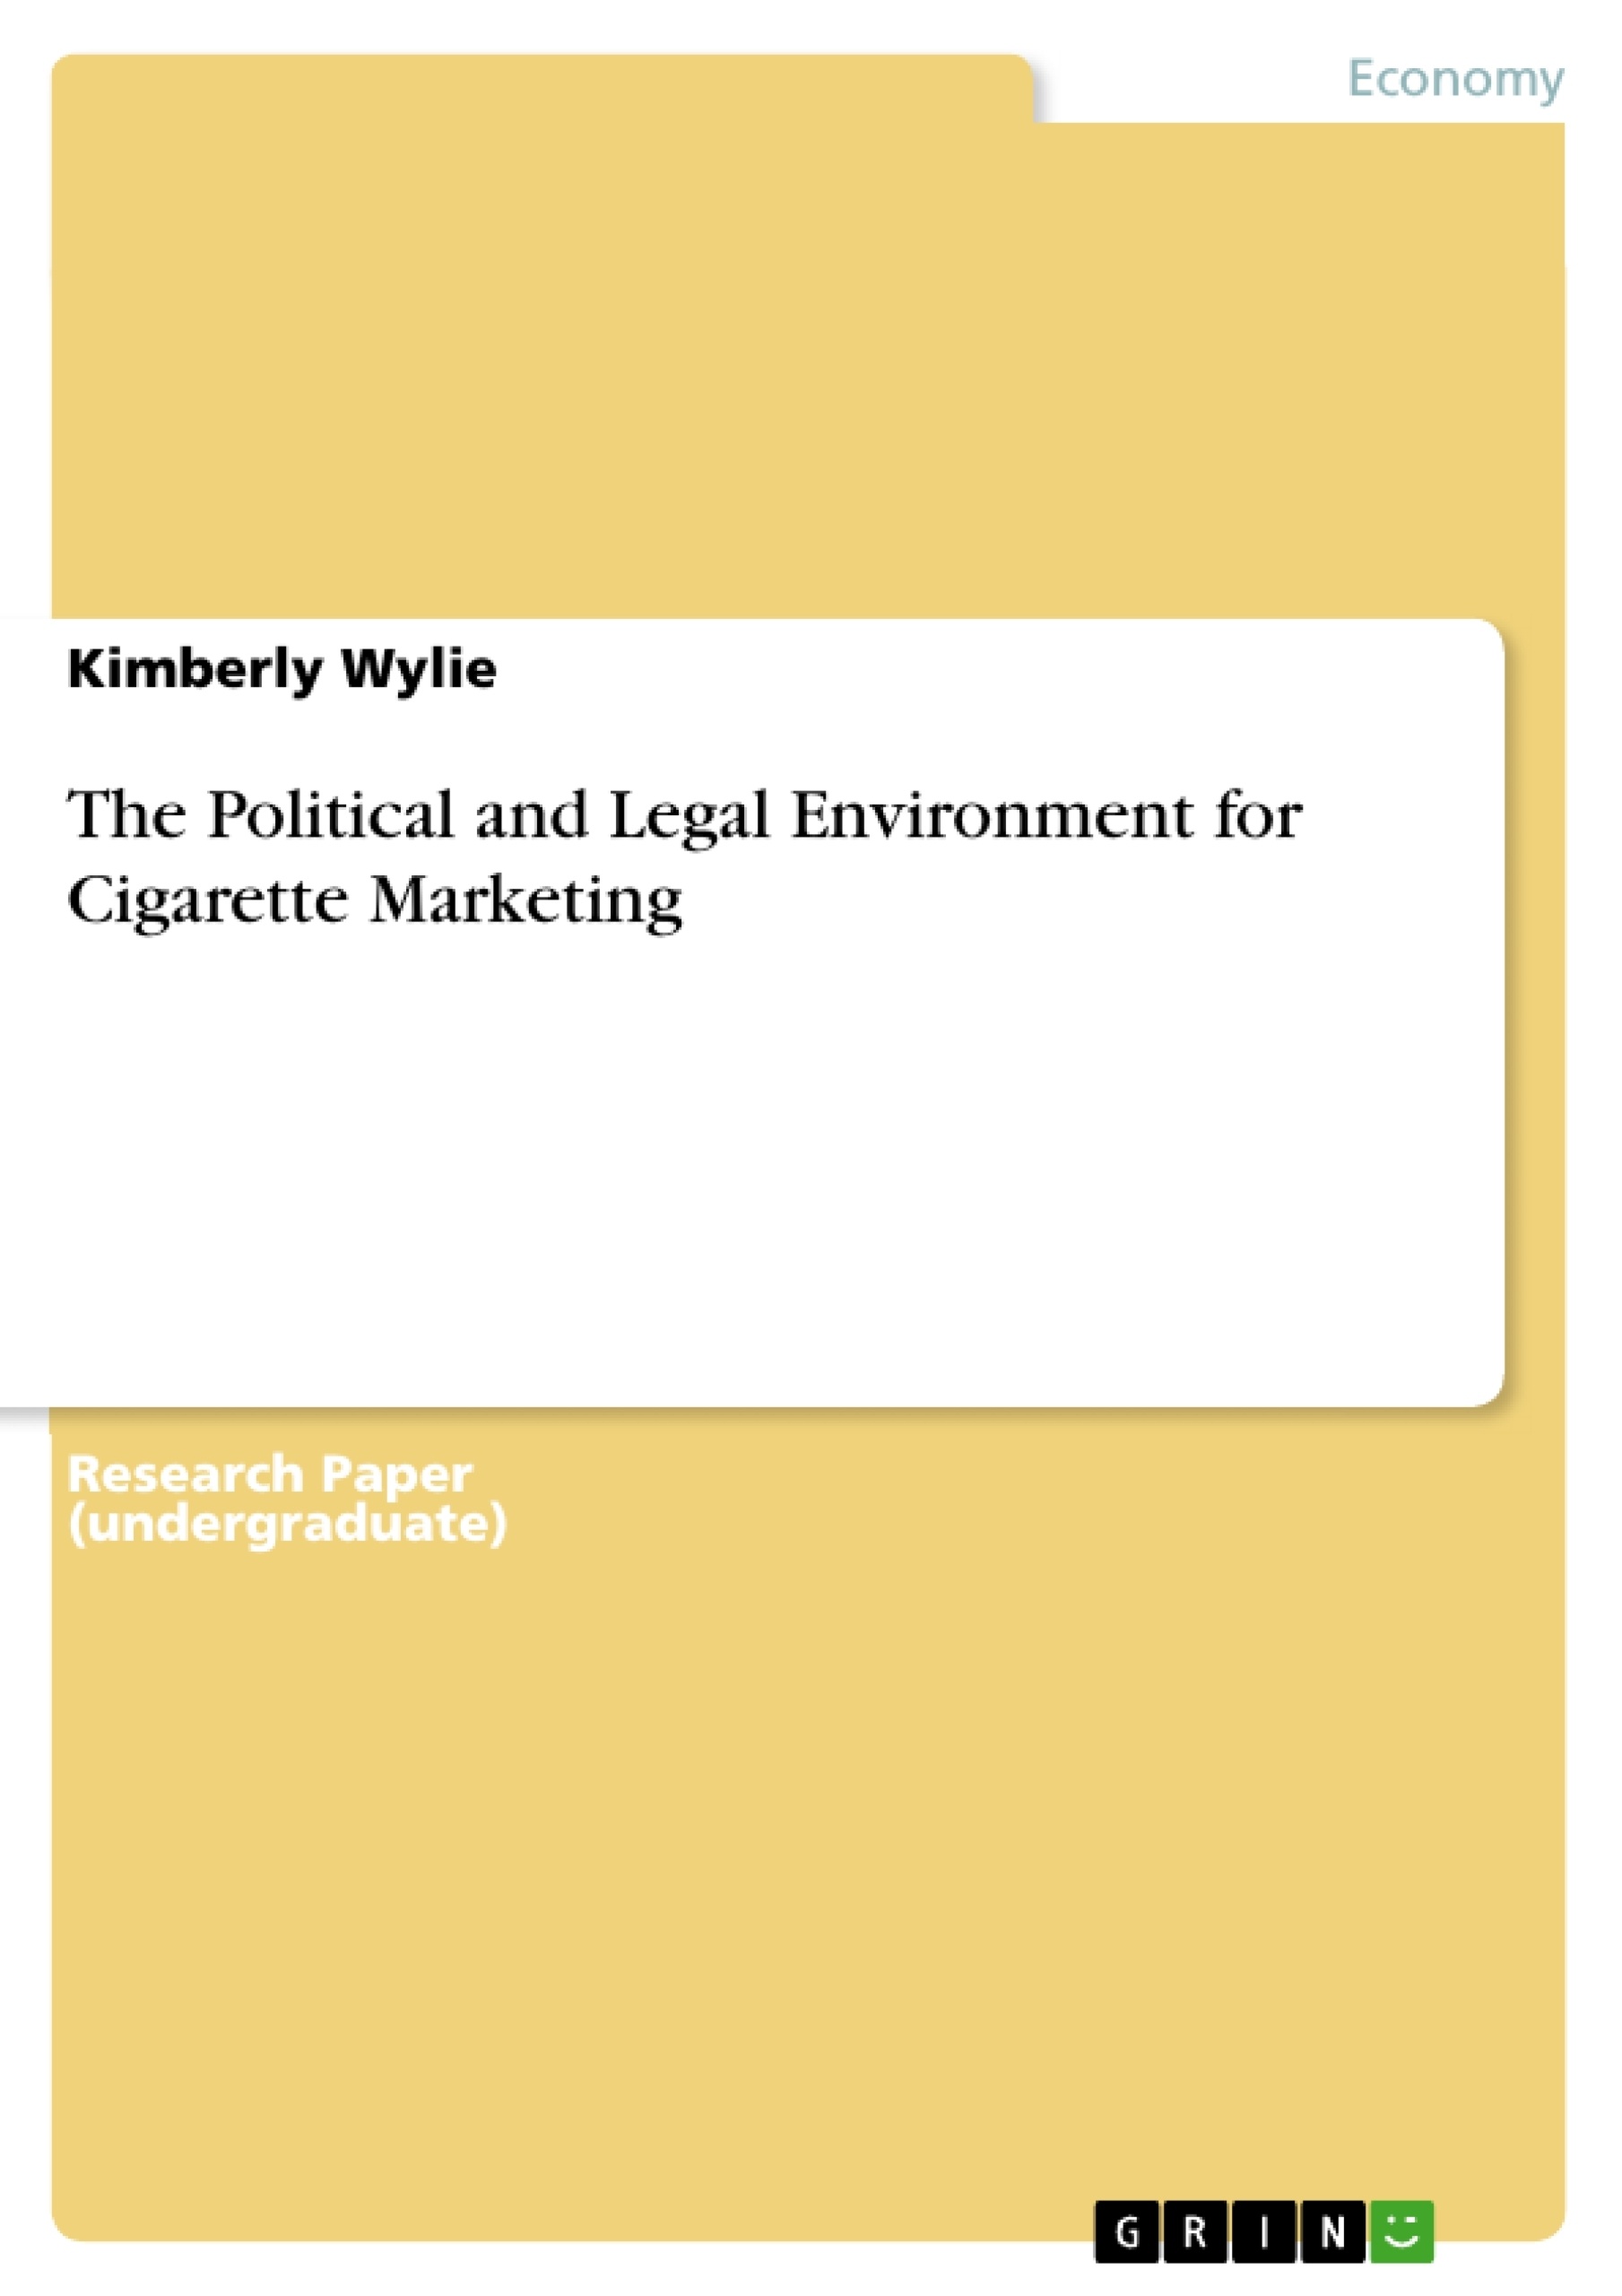 Título: The Political and Legal Environment for Cigarette Marketing